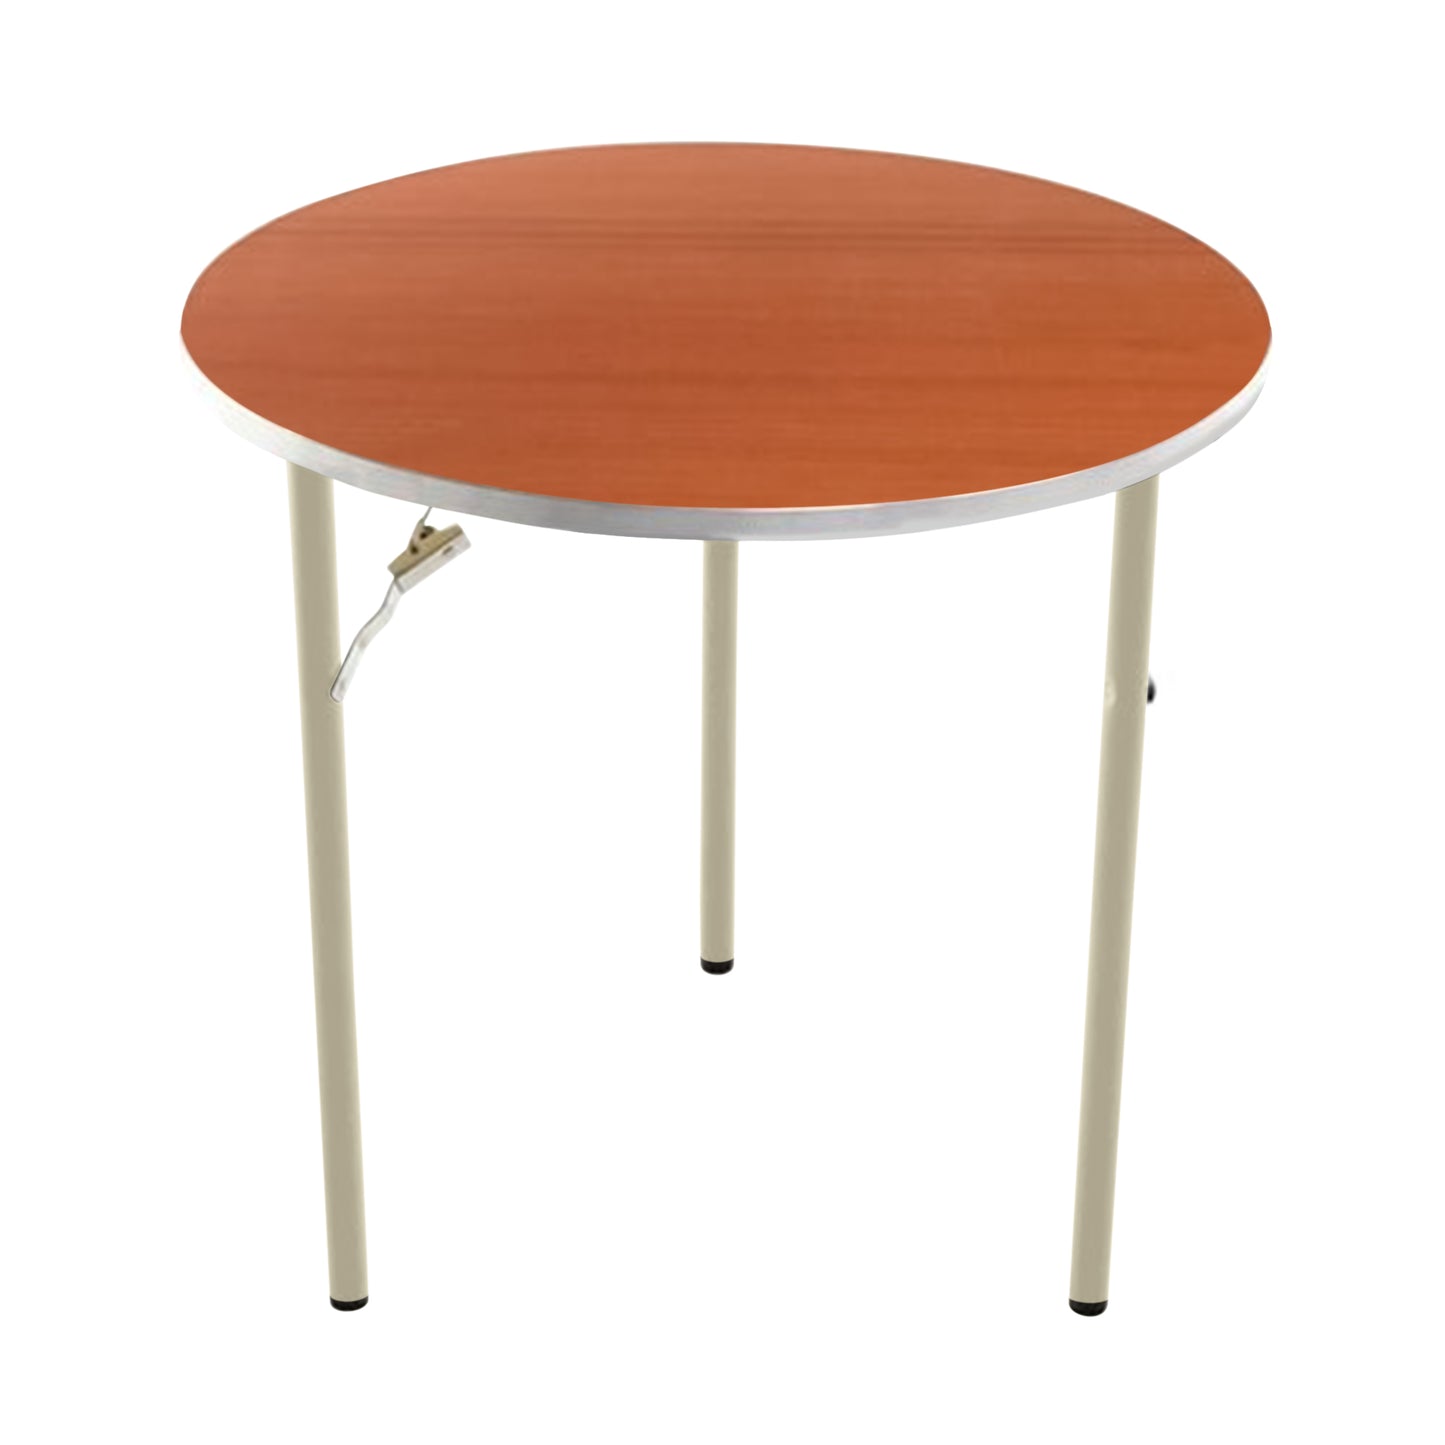 AmTab Folding Table - Plywood Stained and Sealed - Aluminum Edge - Round - 66" Diameter x 29"H  (AmTab AMT-R66PA)